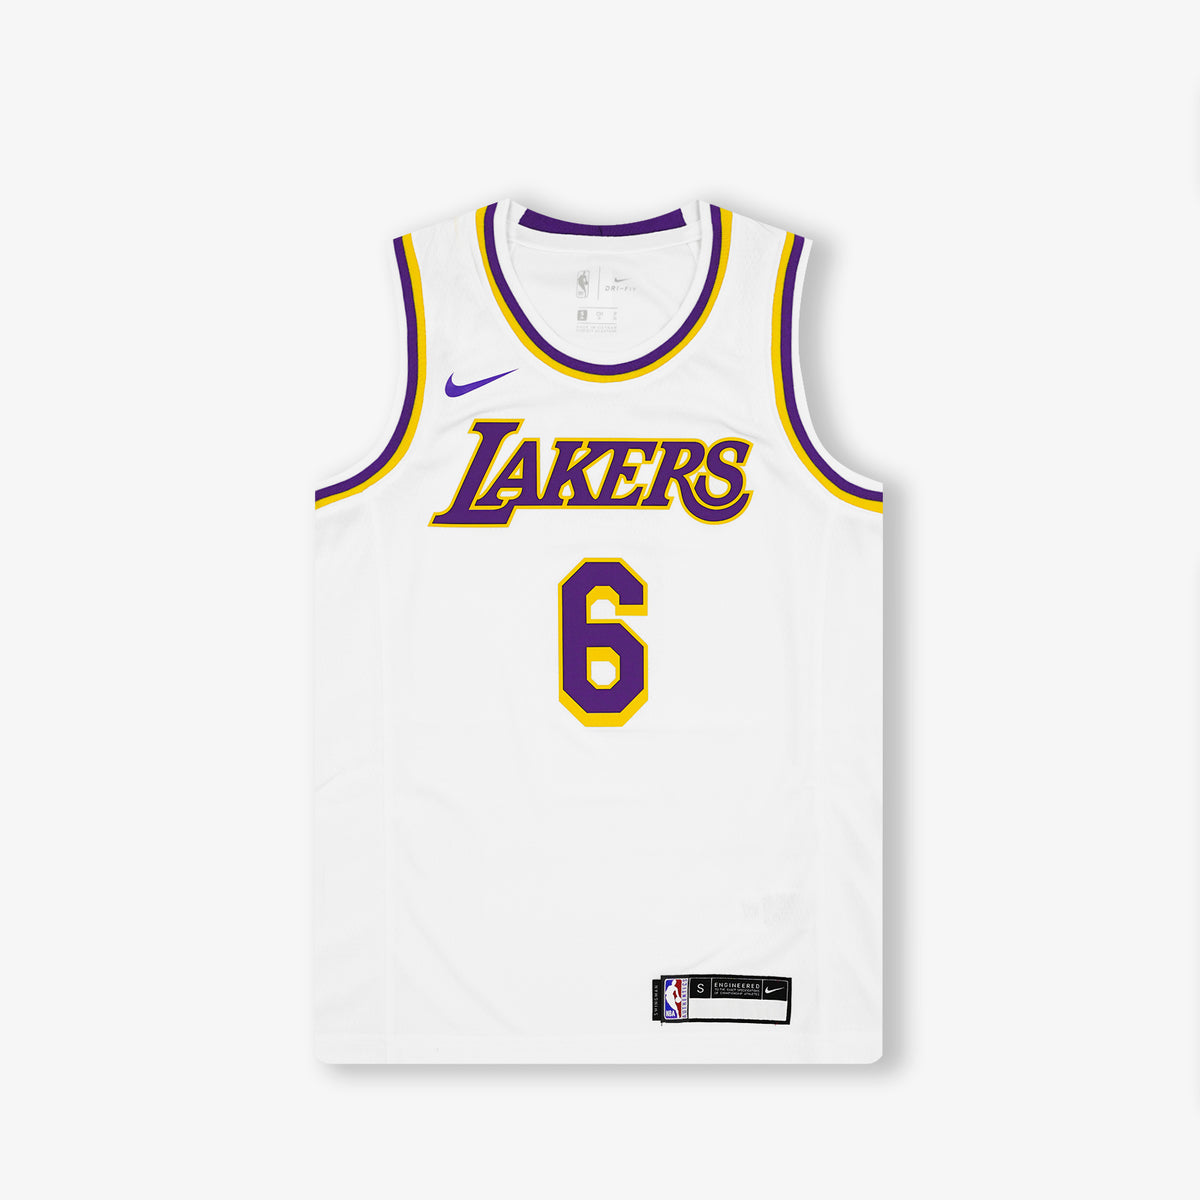 Nike Youth Los Angeles Lakers LeBron James Icon Edition Swingman Jersey, Gold, Size: Large, Polyester